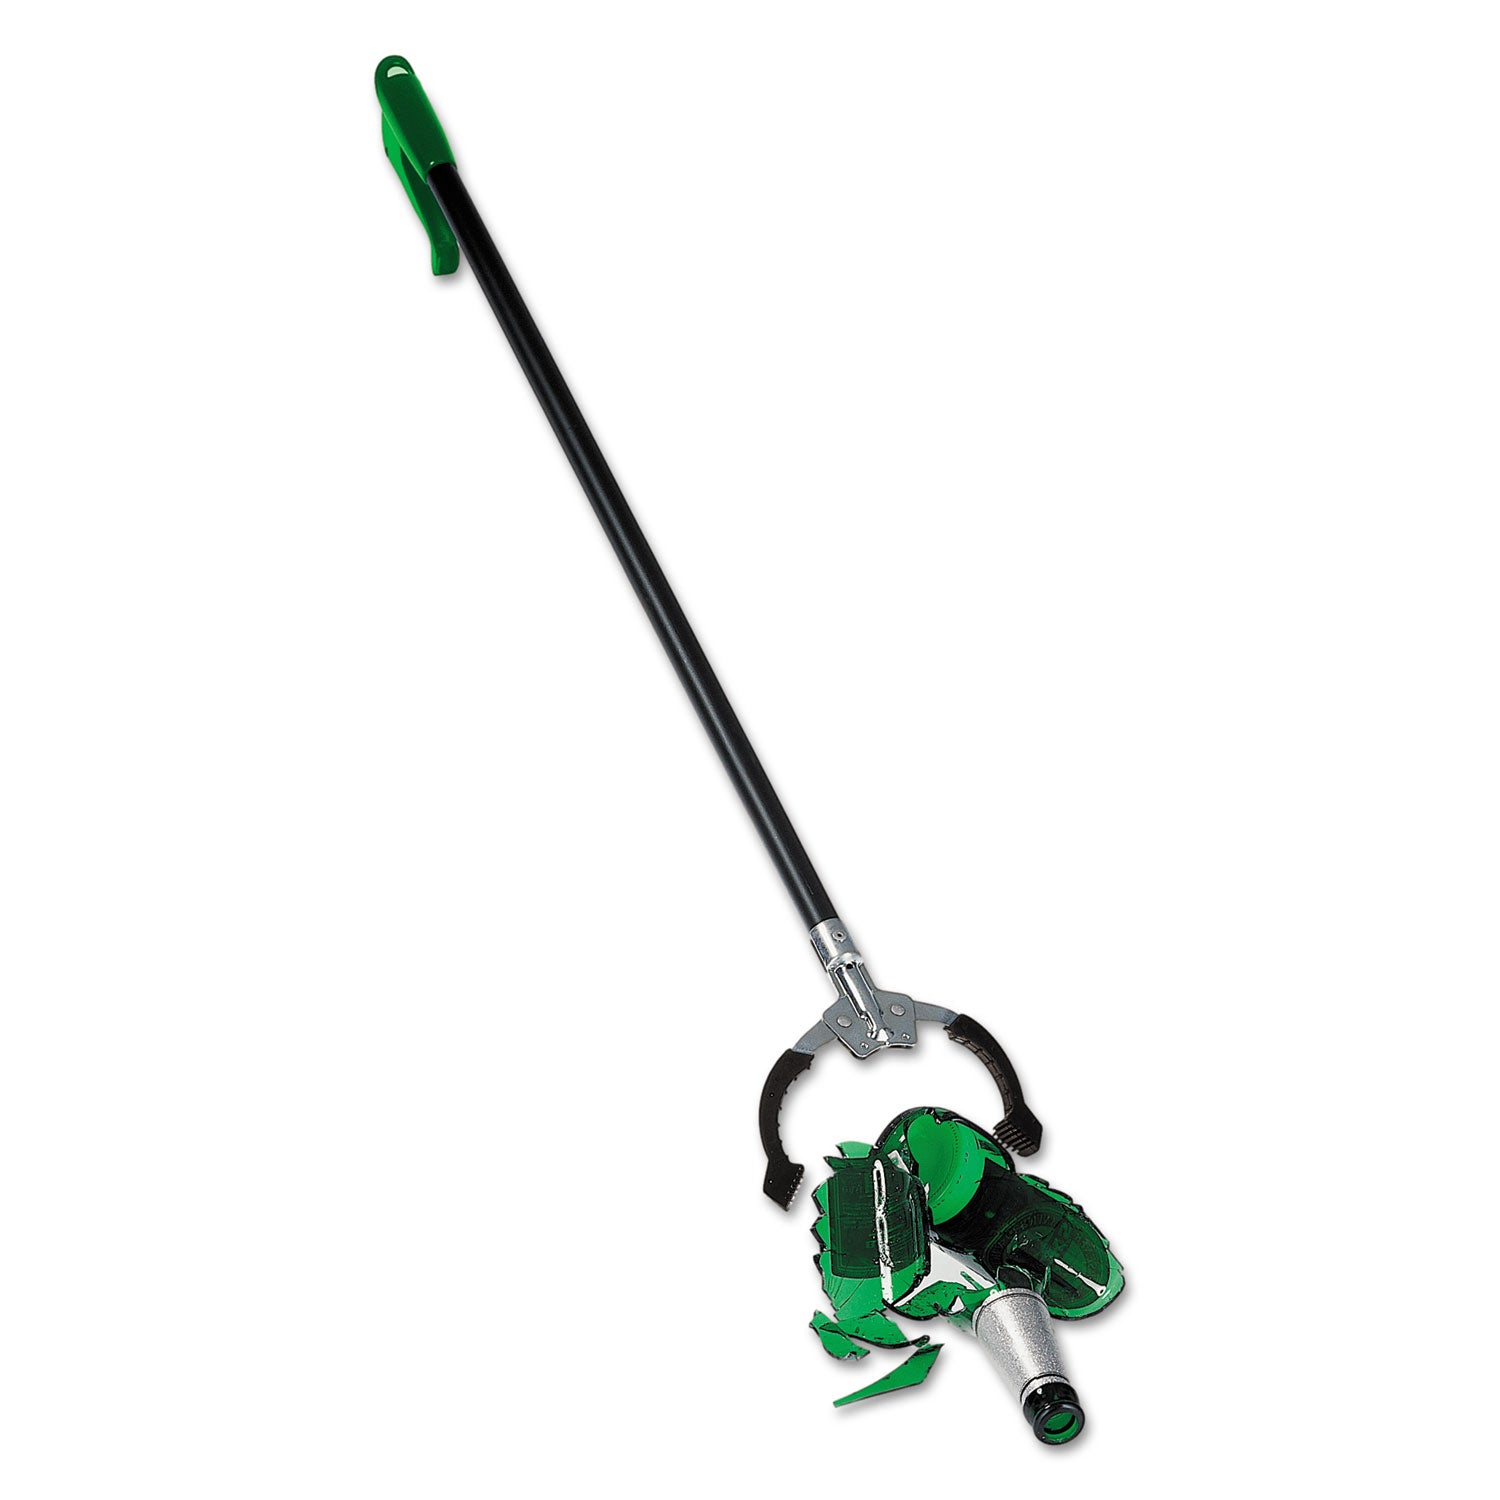 Nifty Nabber Extension Arm with Claw, 36", Black/Green - 